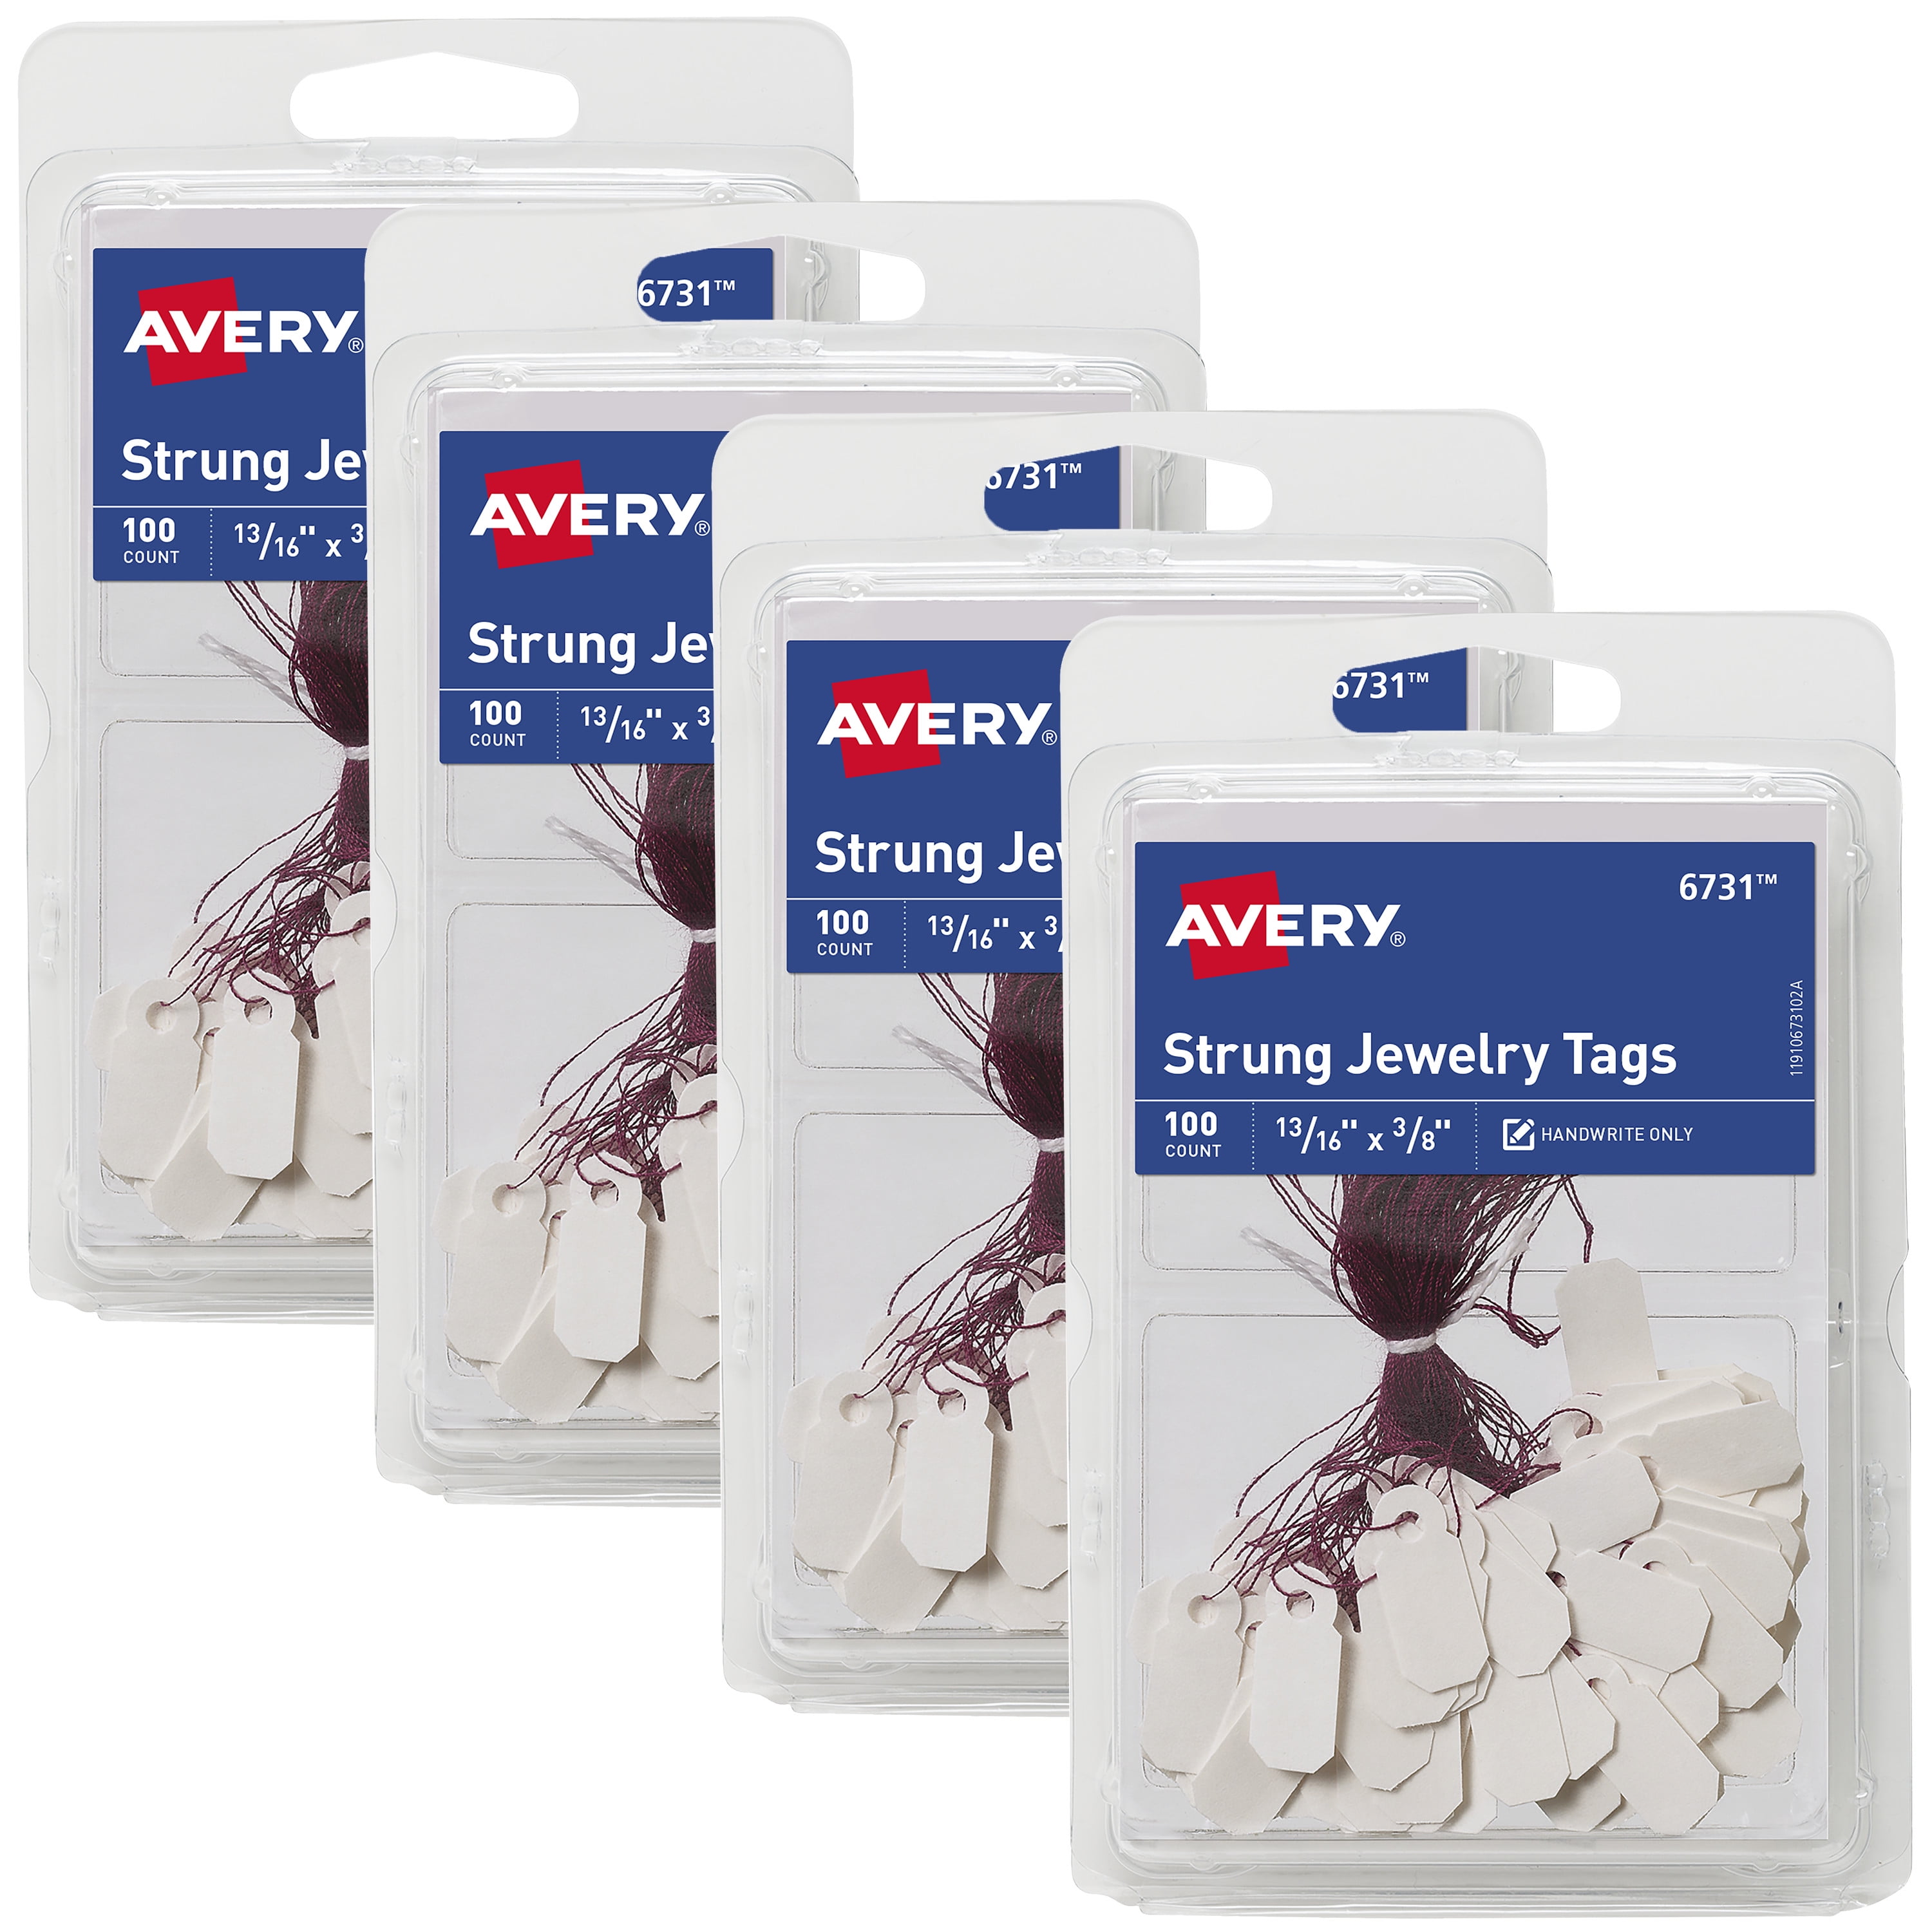 Avery Jewelry Tags with String, 0.8125 x 0.375 Inches, 4 Packs, 400 Strung  Tags Total (50226) 